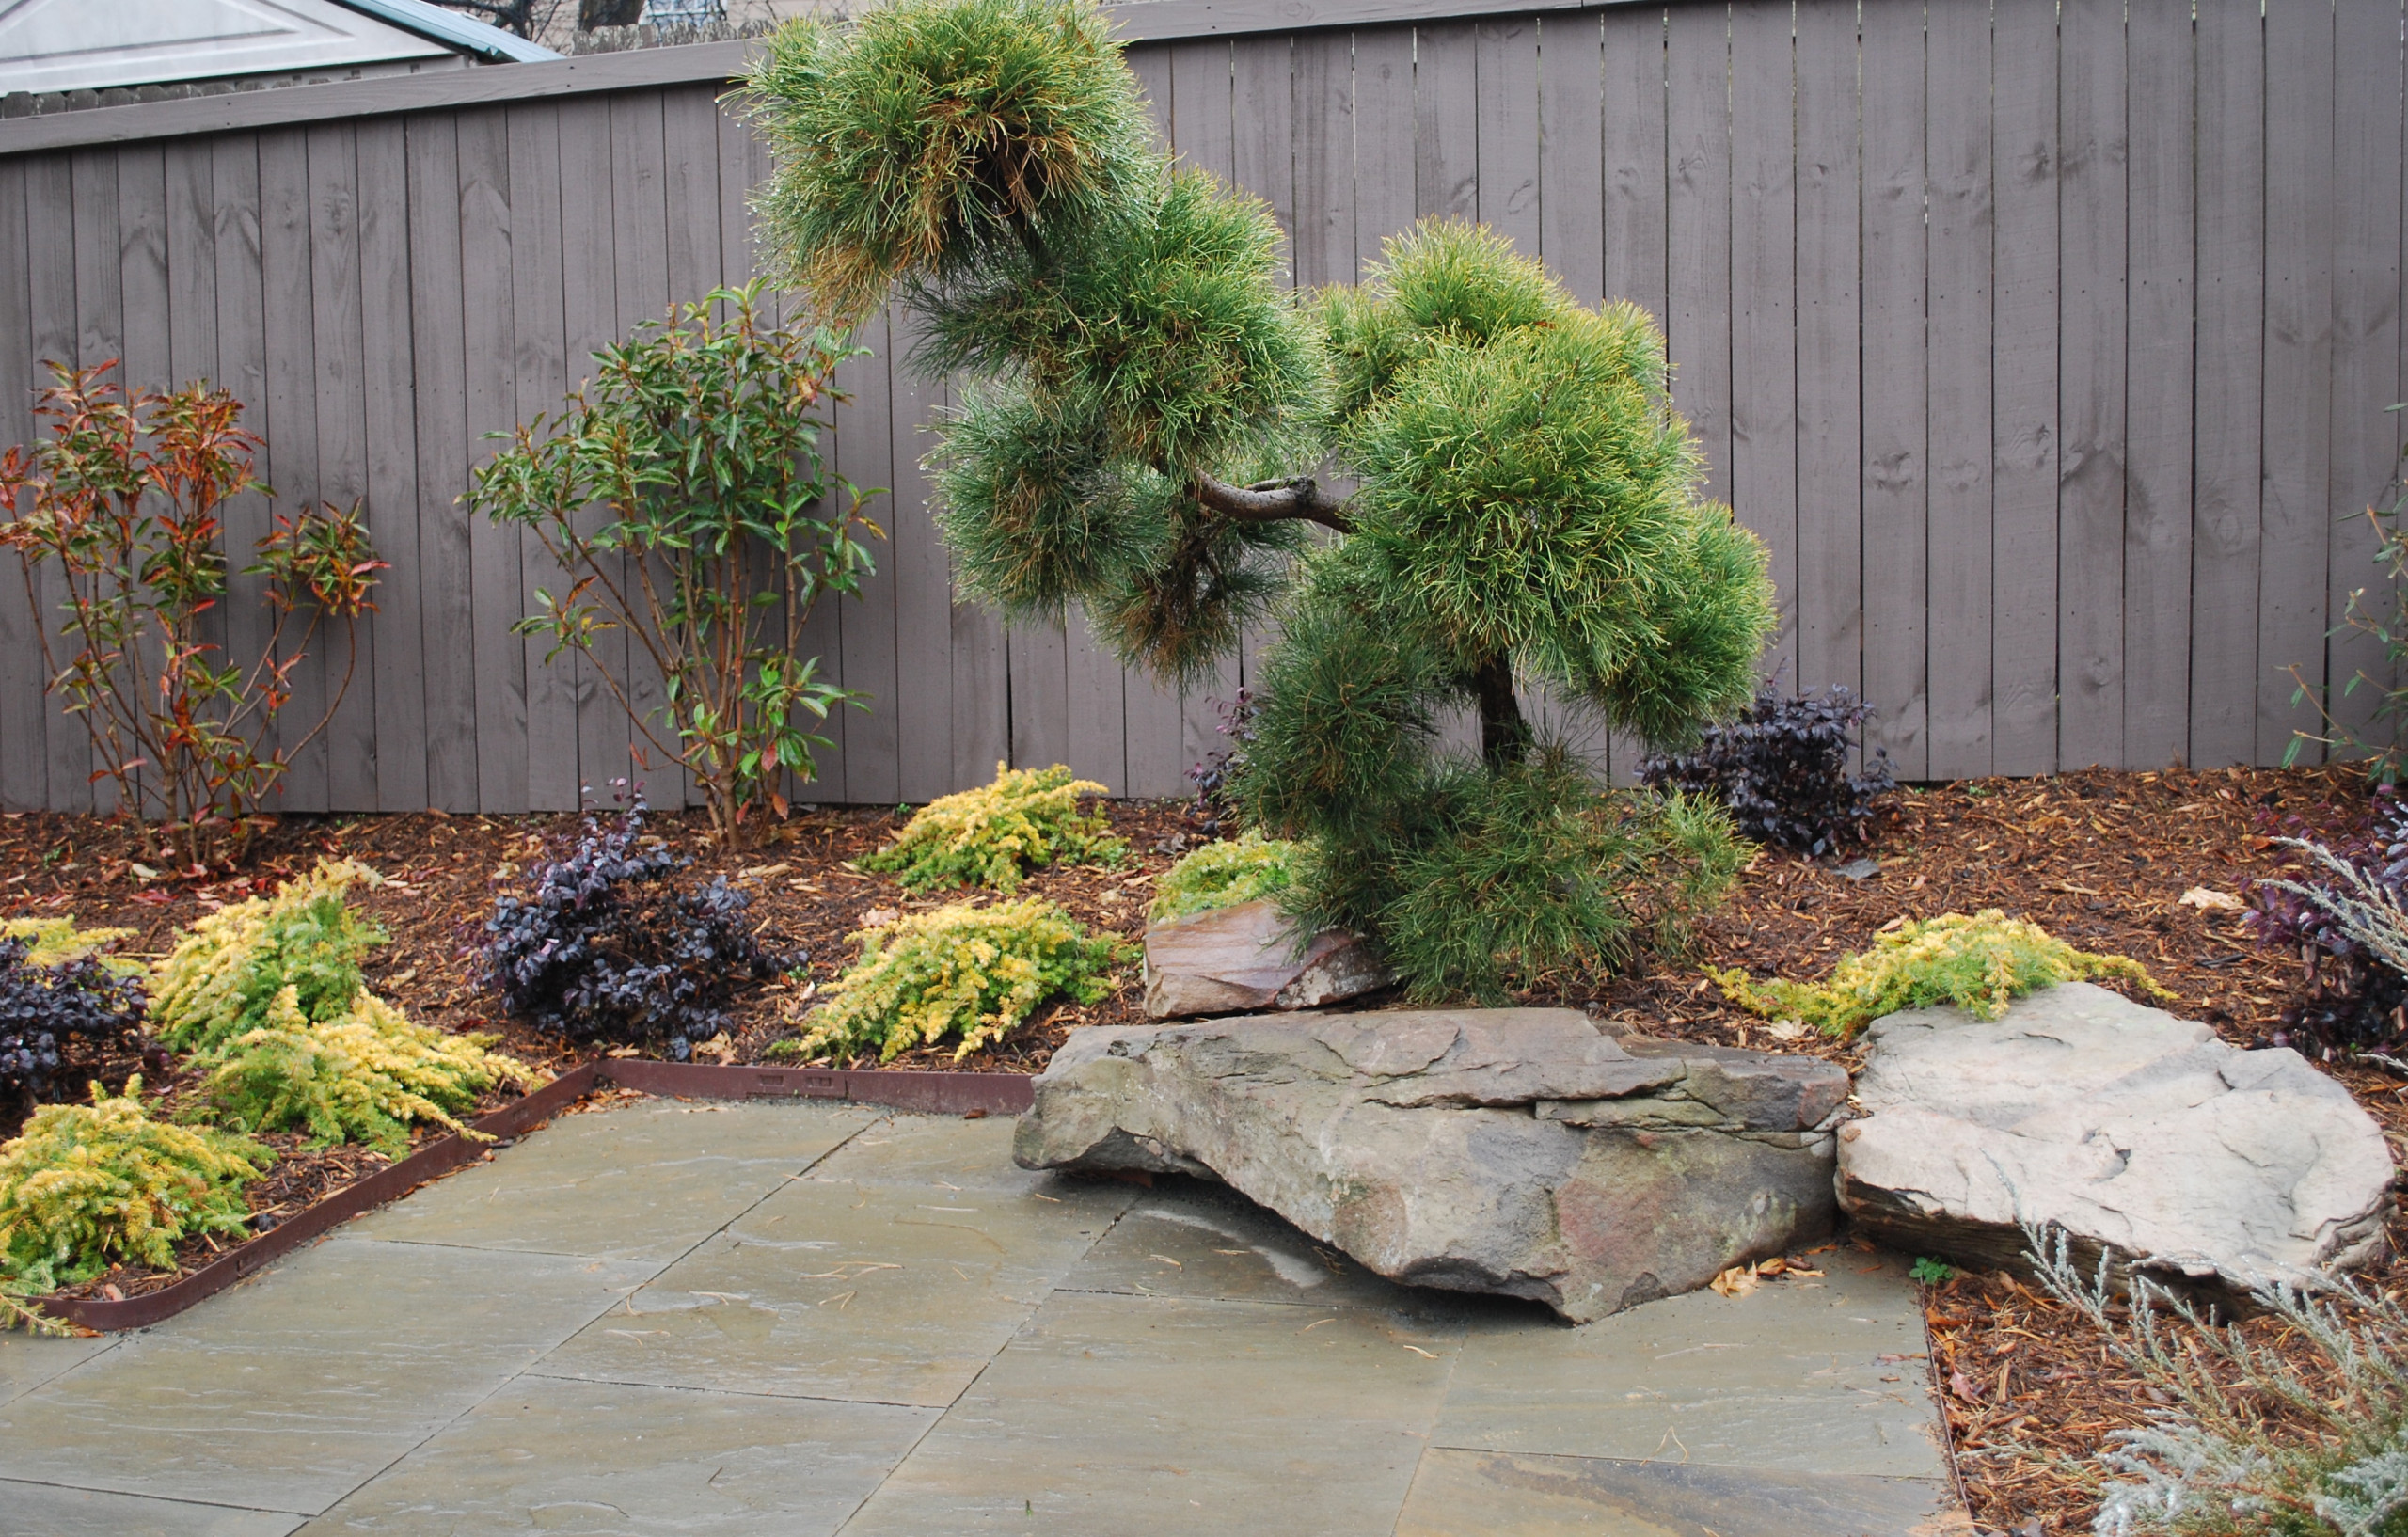 Japanese pruned black pine over boulders cut into patio.